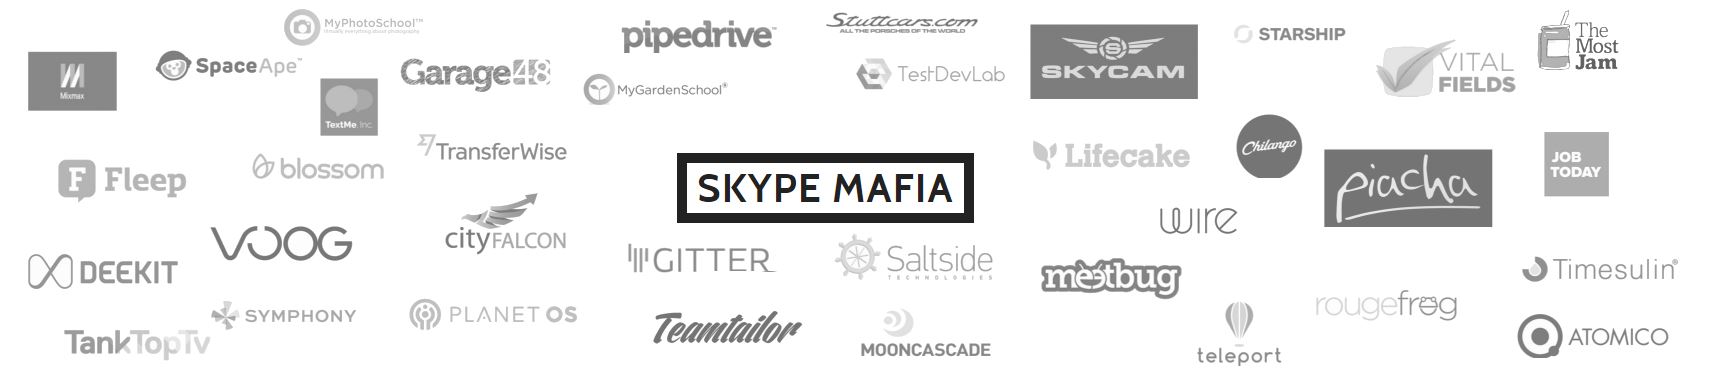 Skype Mafia - companies founded by ex-Skype employees